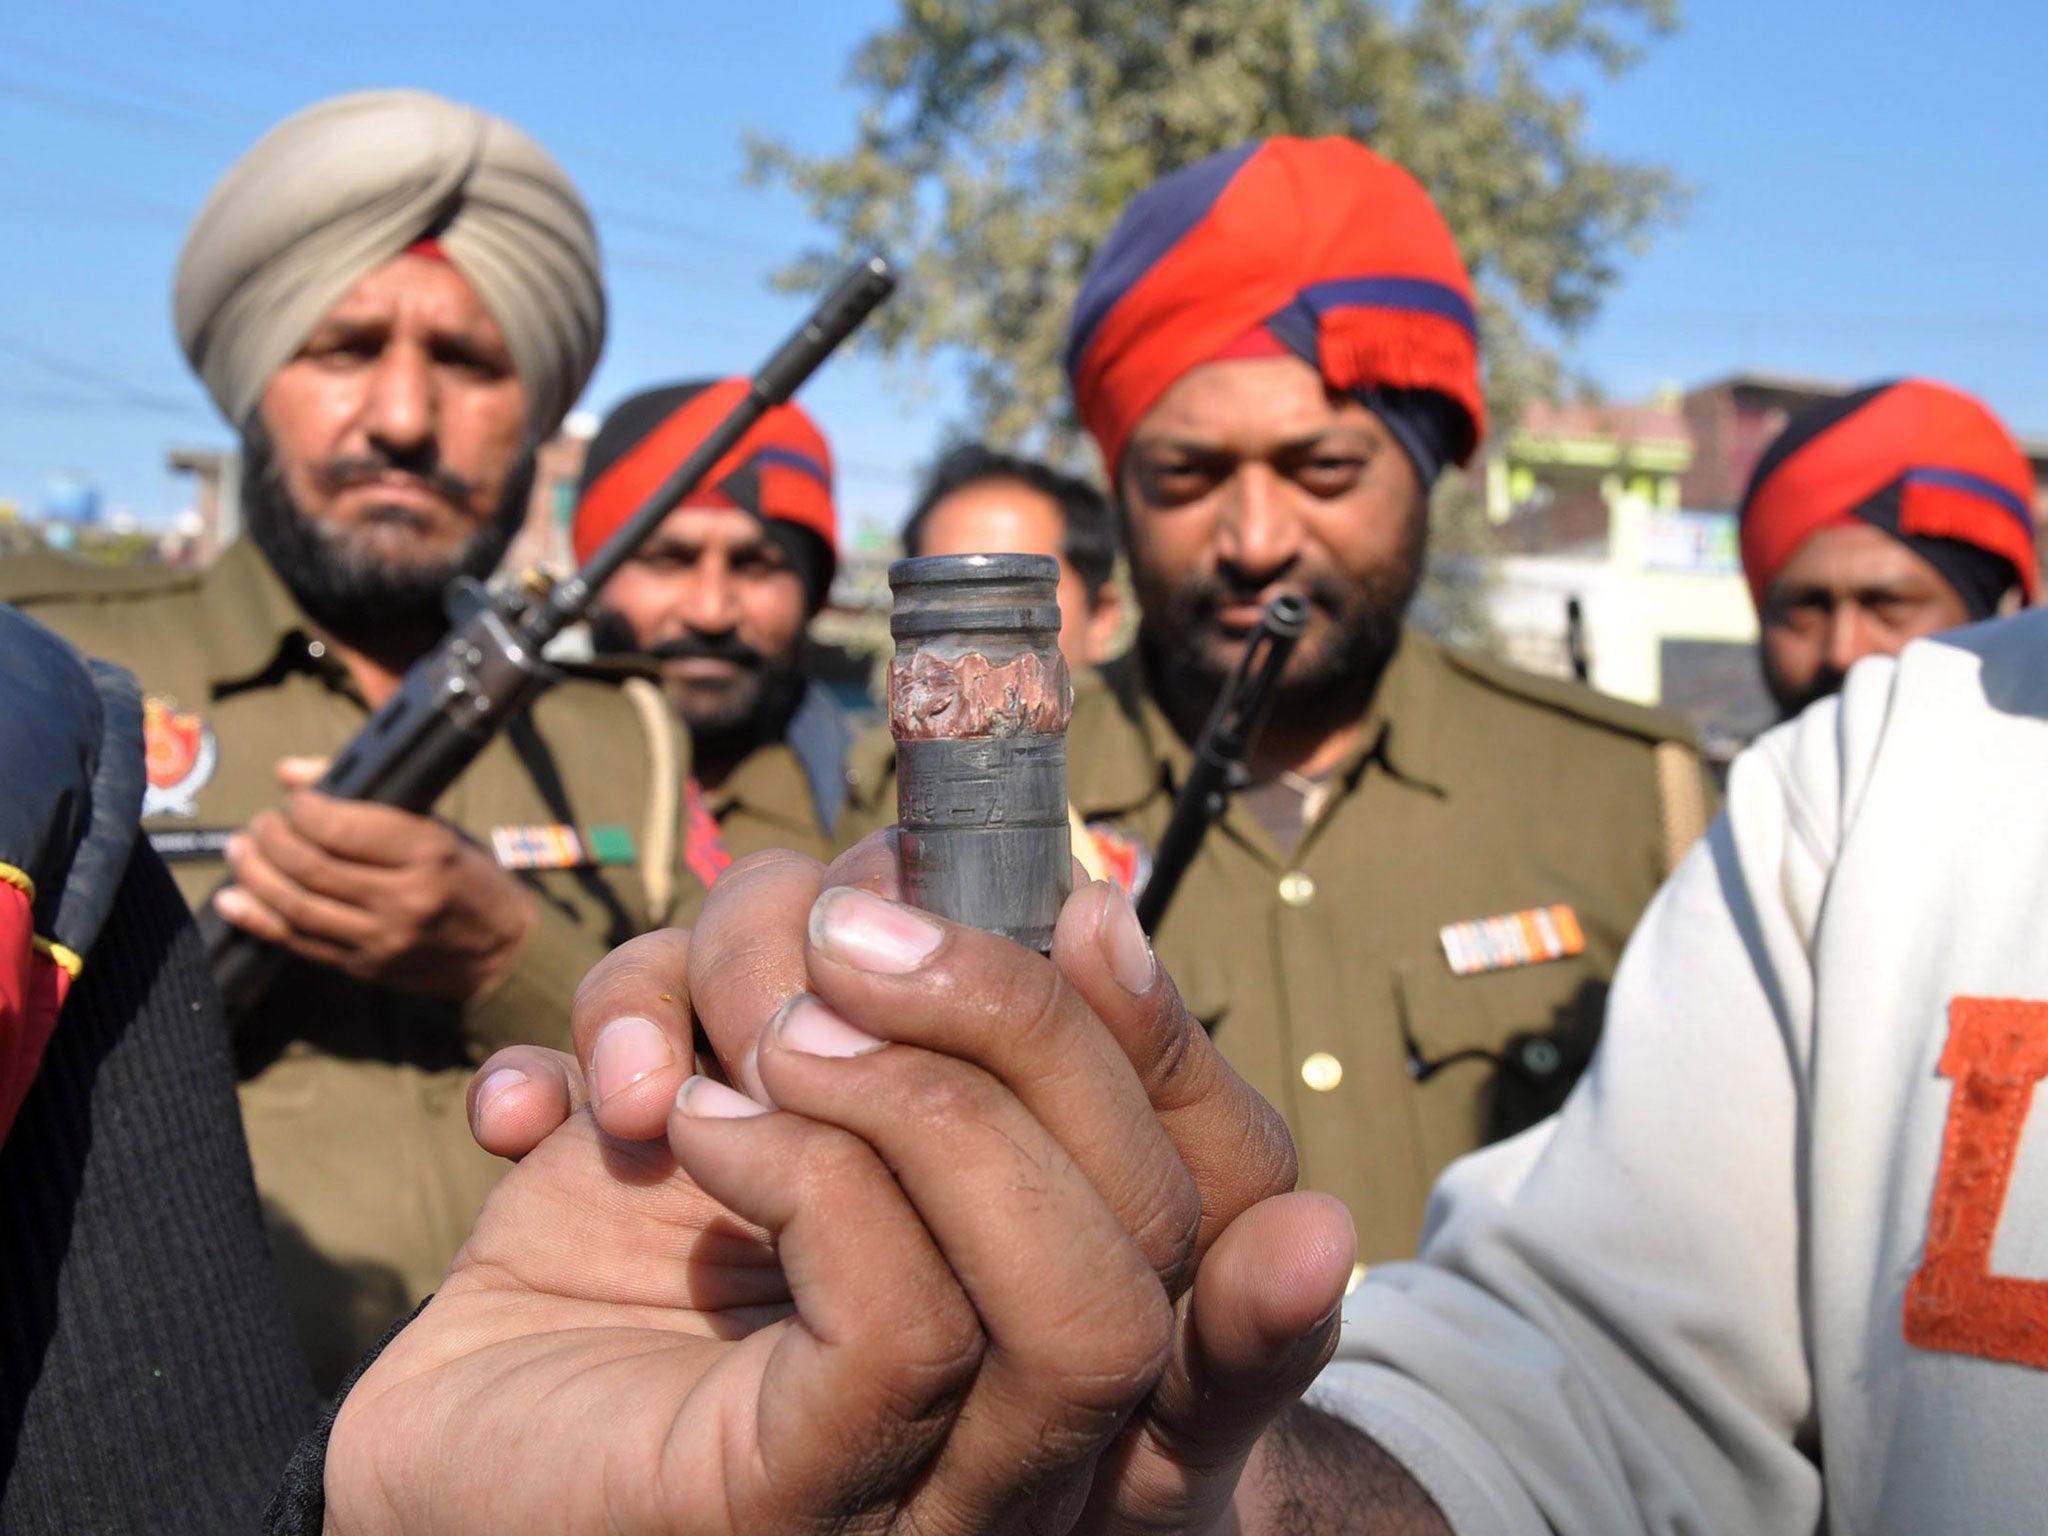 Indian police show what is said to be ammunition found after the raid